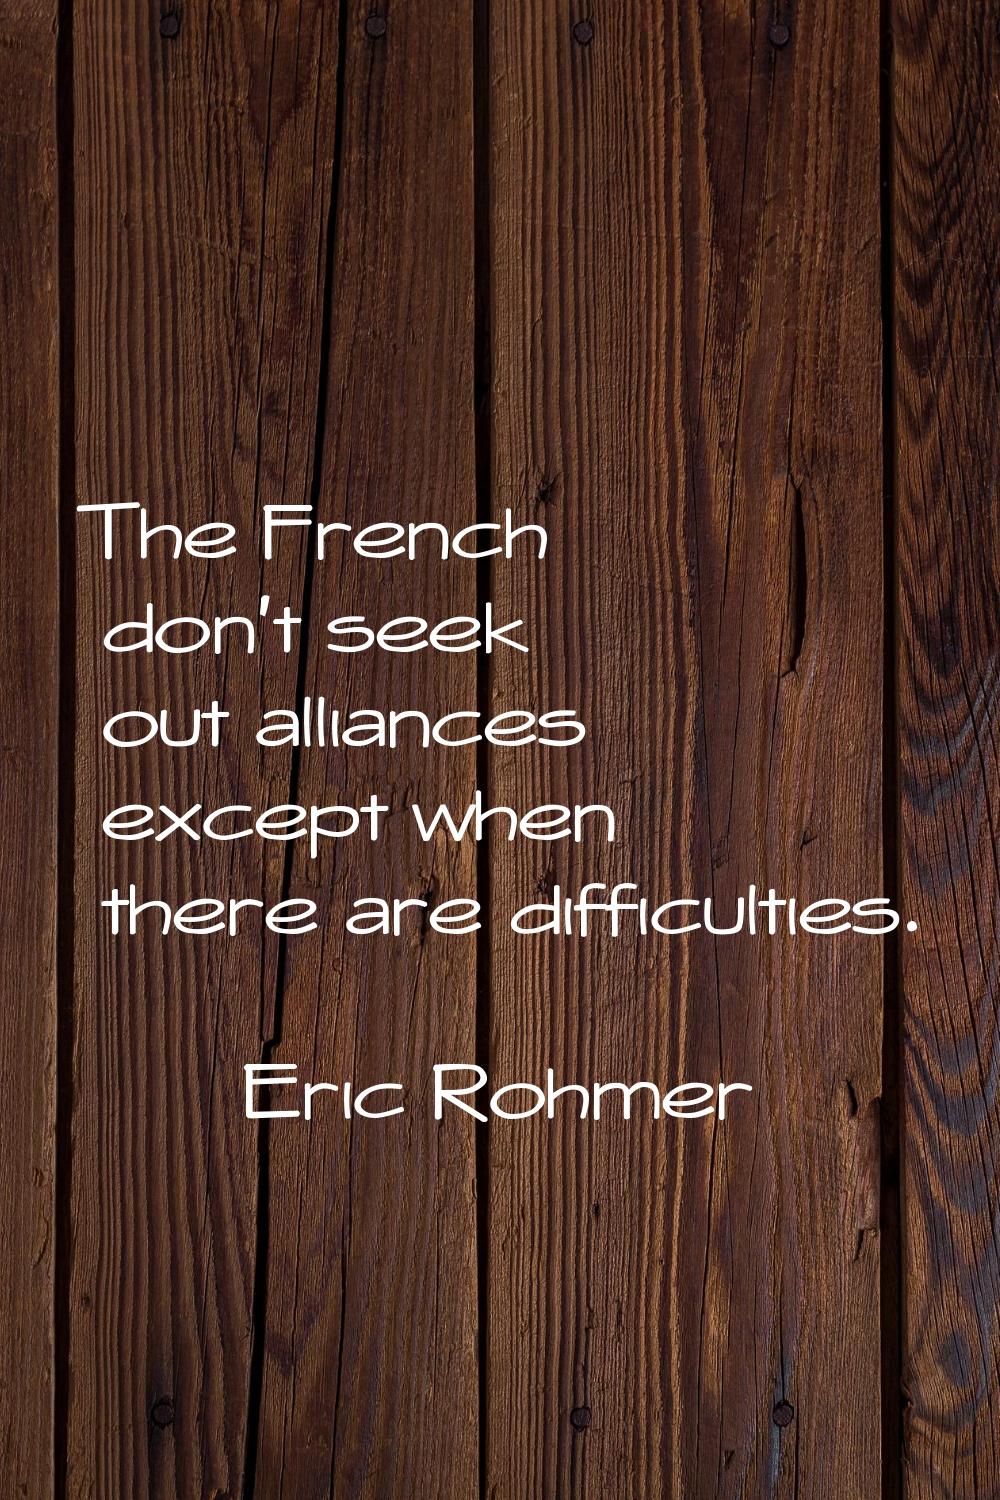 The French don't seek out alliances except when there are difficulties.